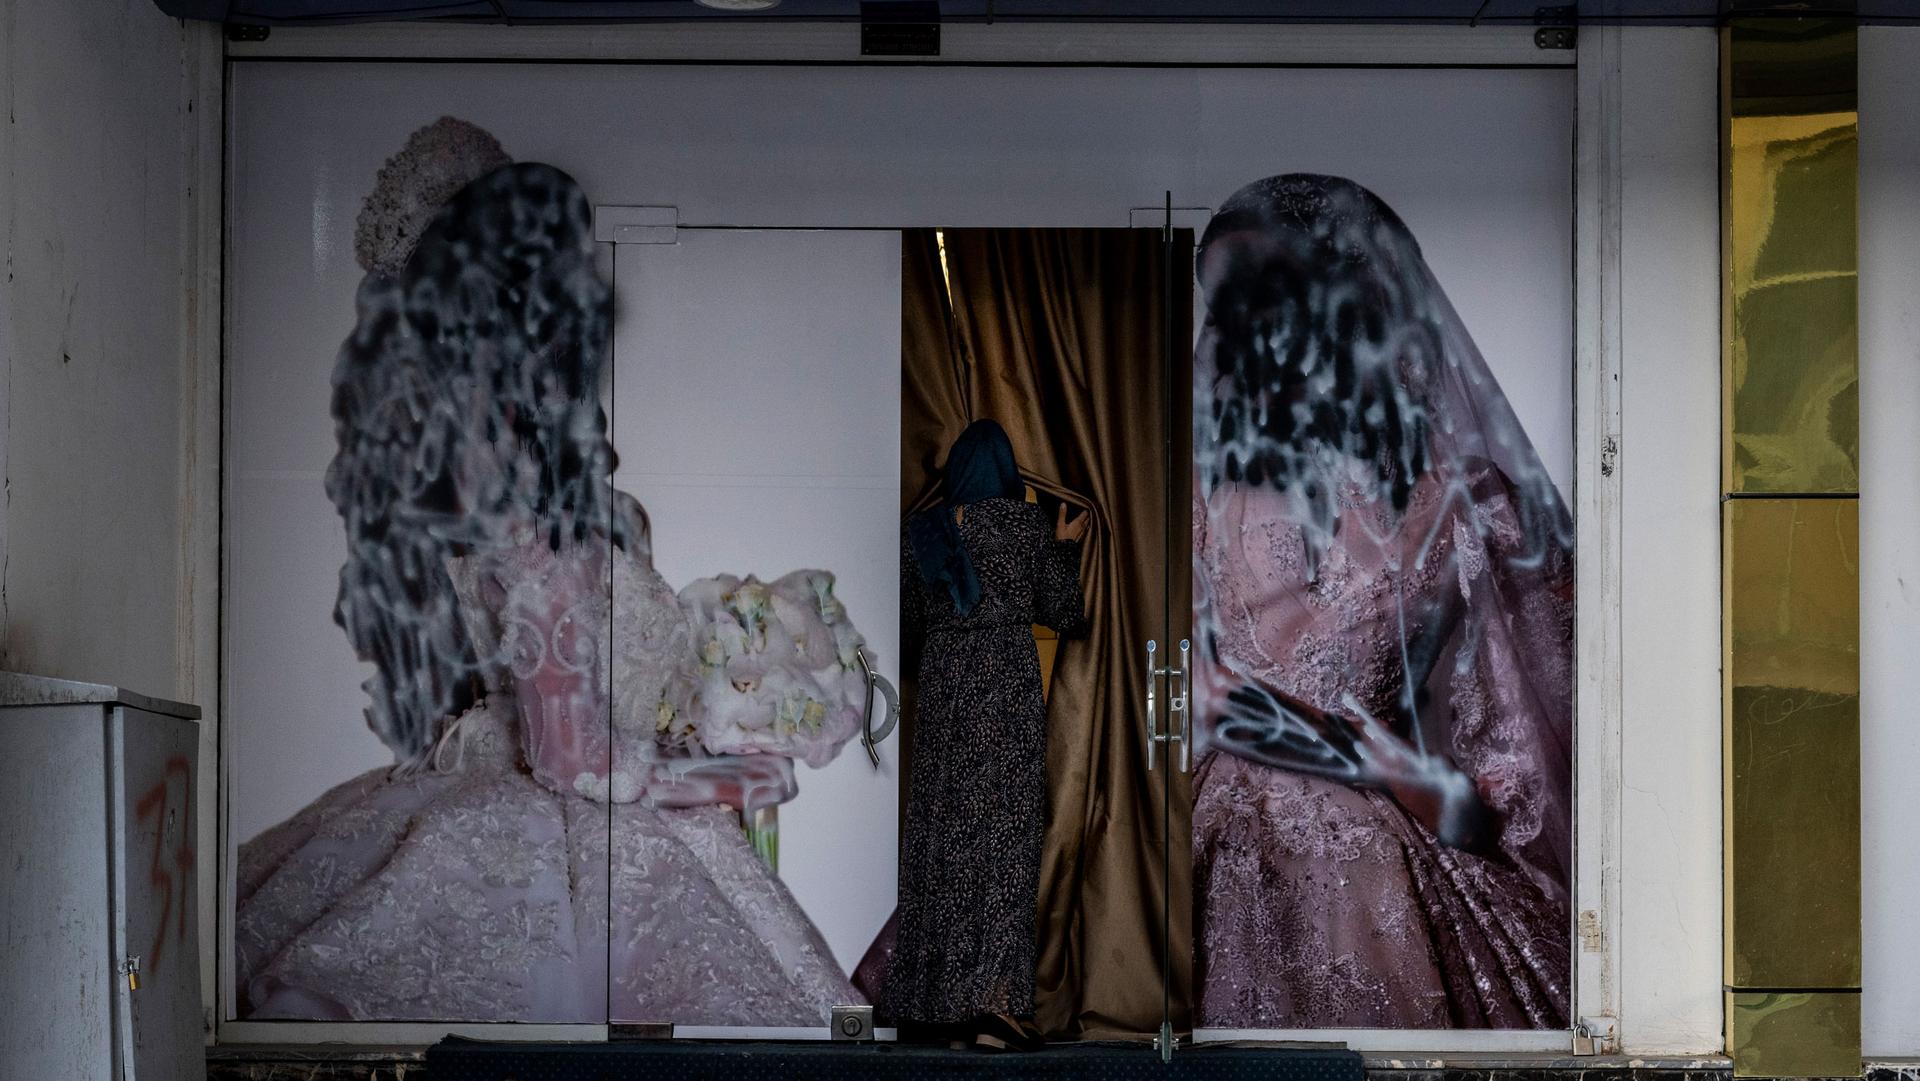 A woman is shown holding back a curtain and entering a salon with painted over pictures of women on either side of the doorway.